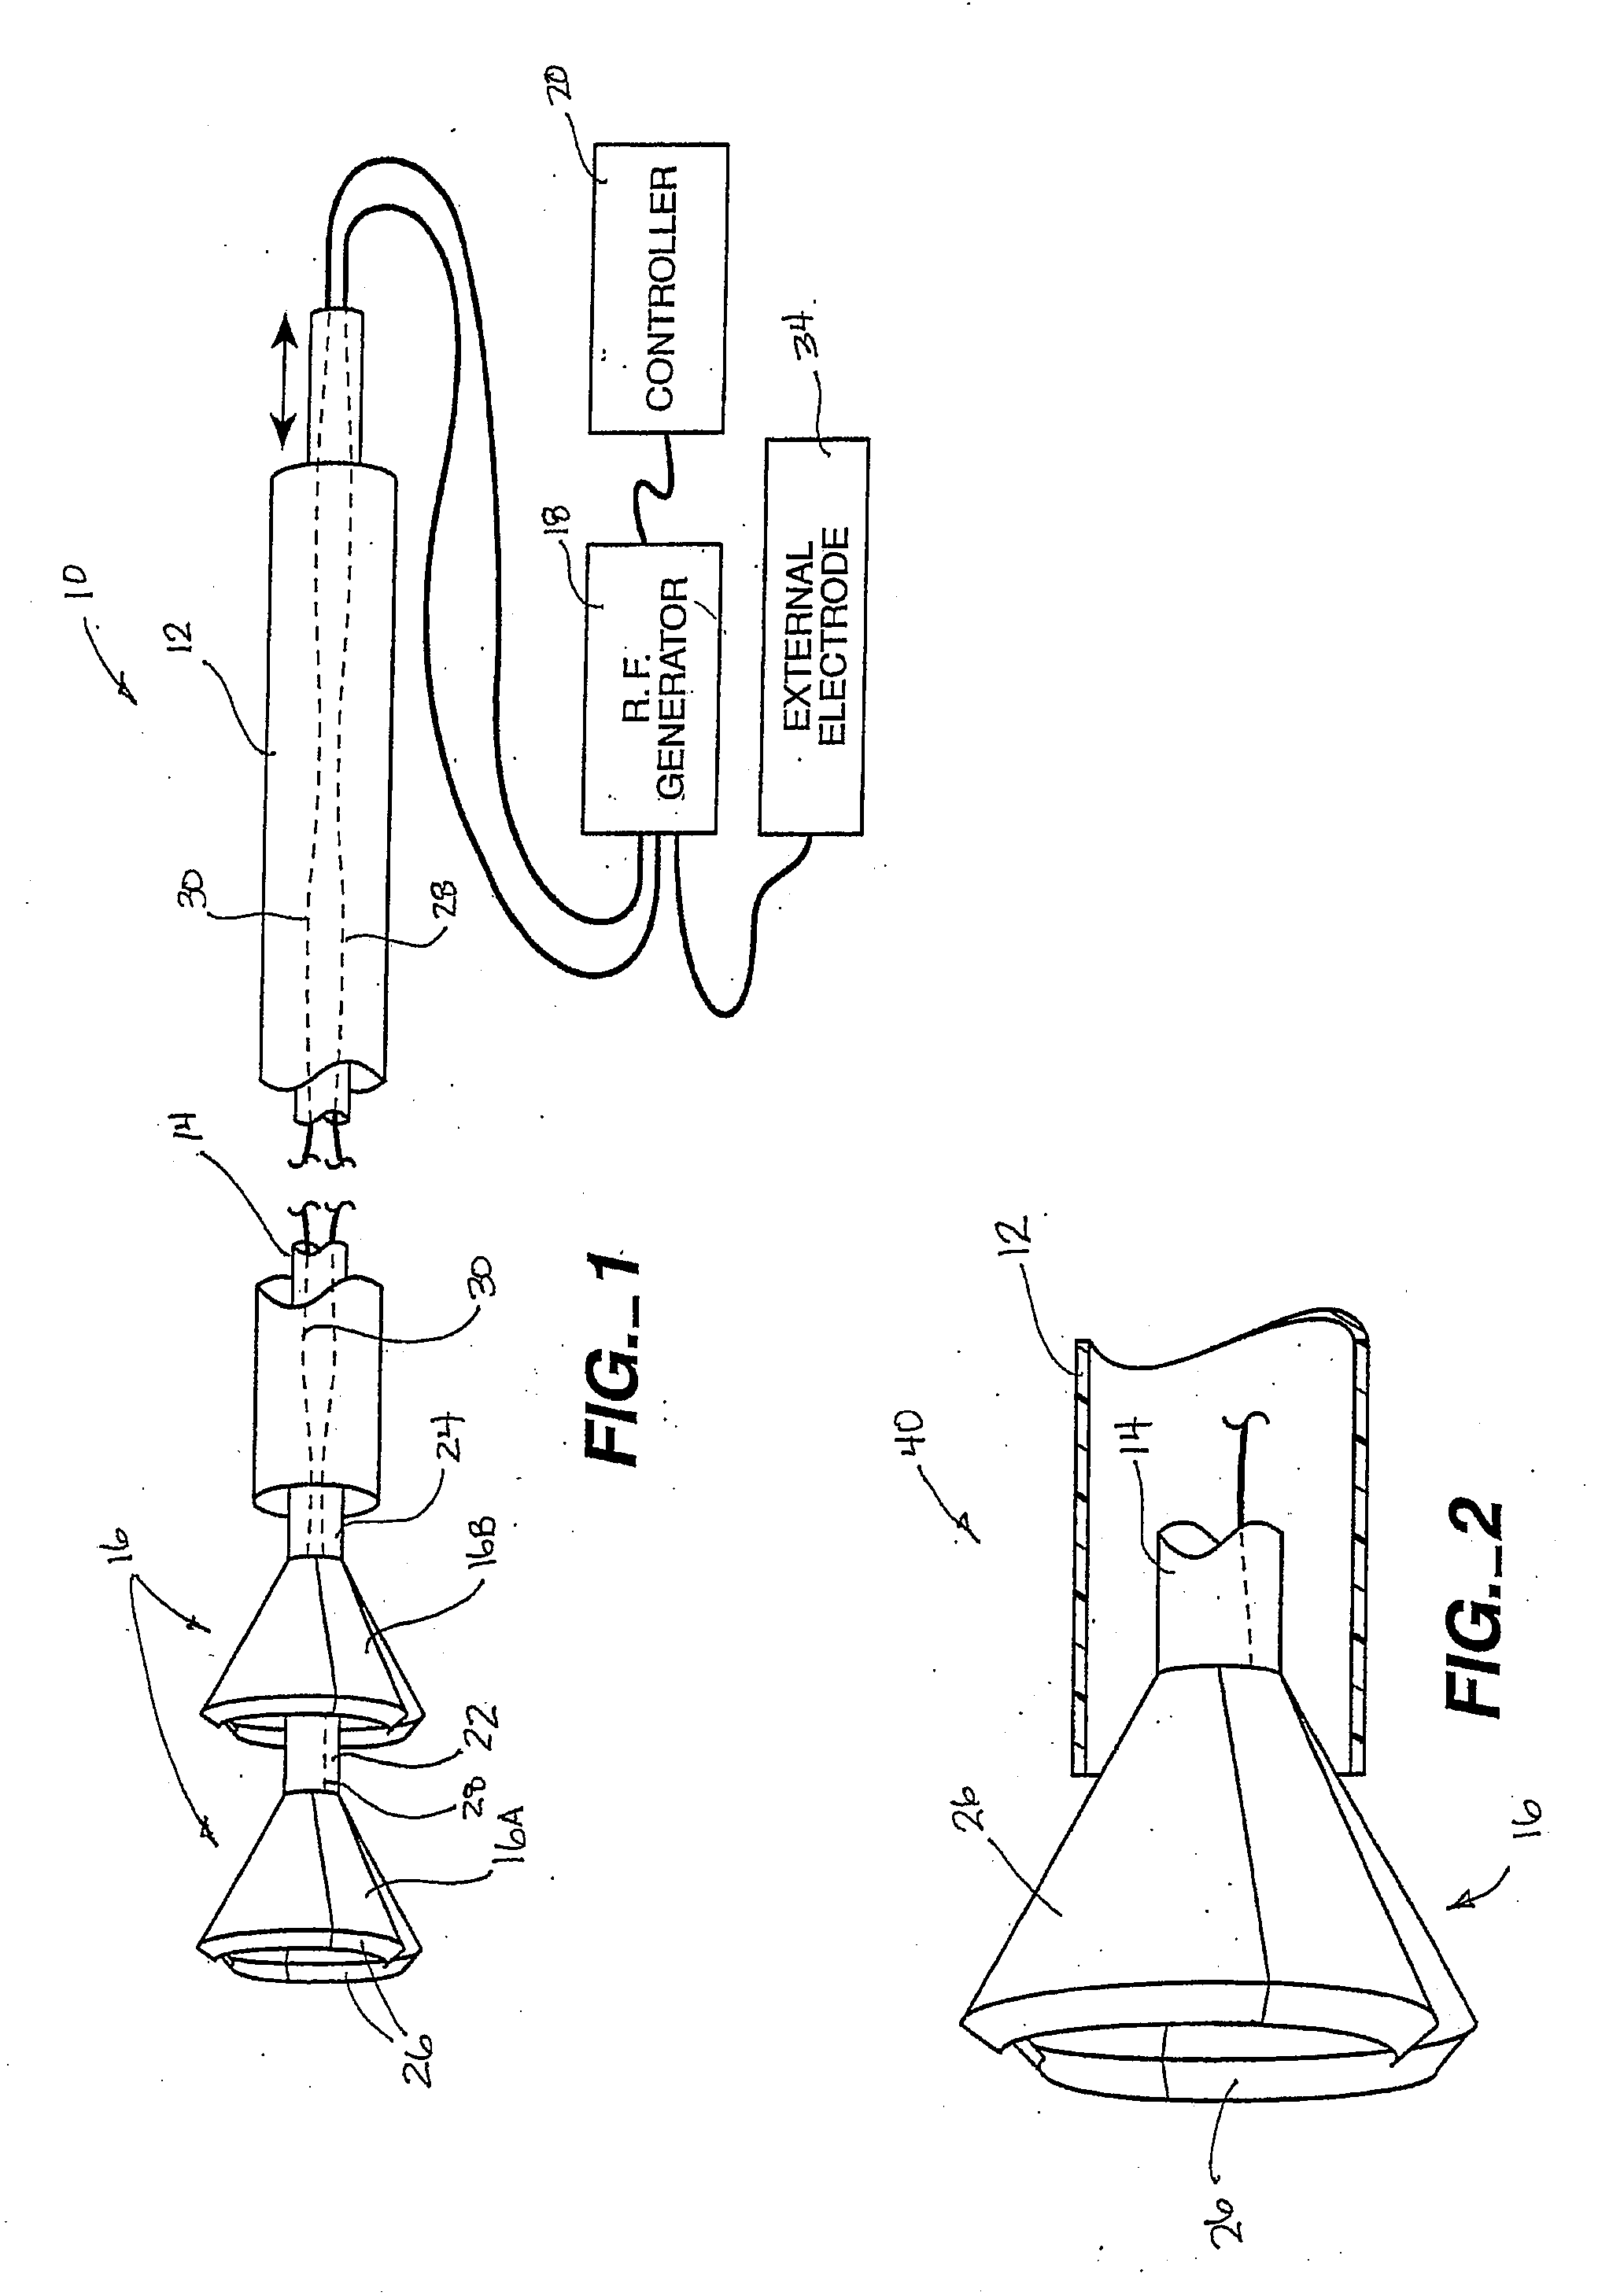 Expandable electode devices and methods of treating bronchial tubes